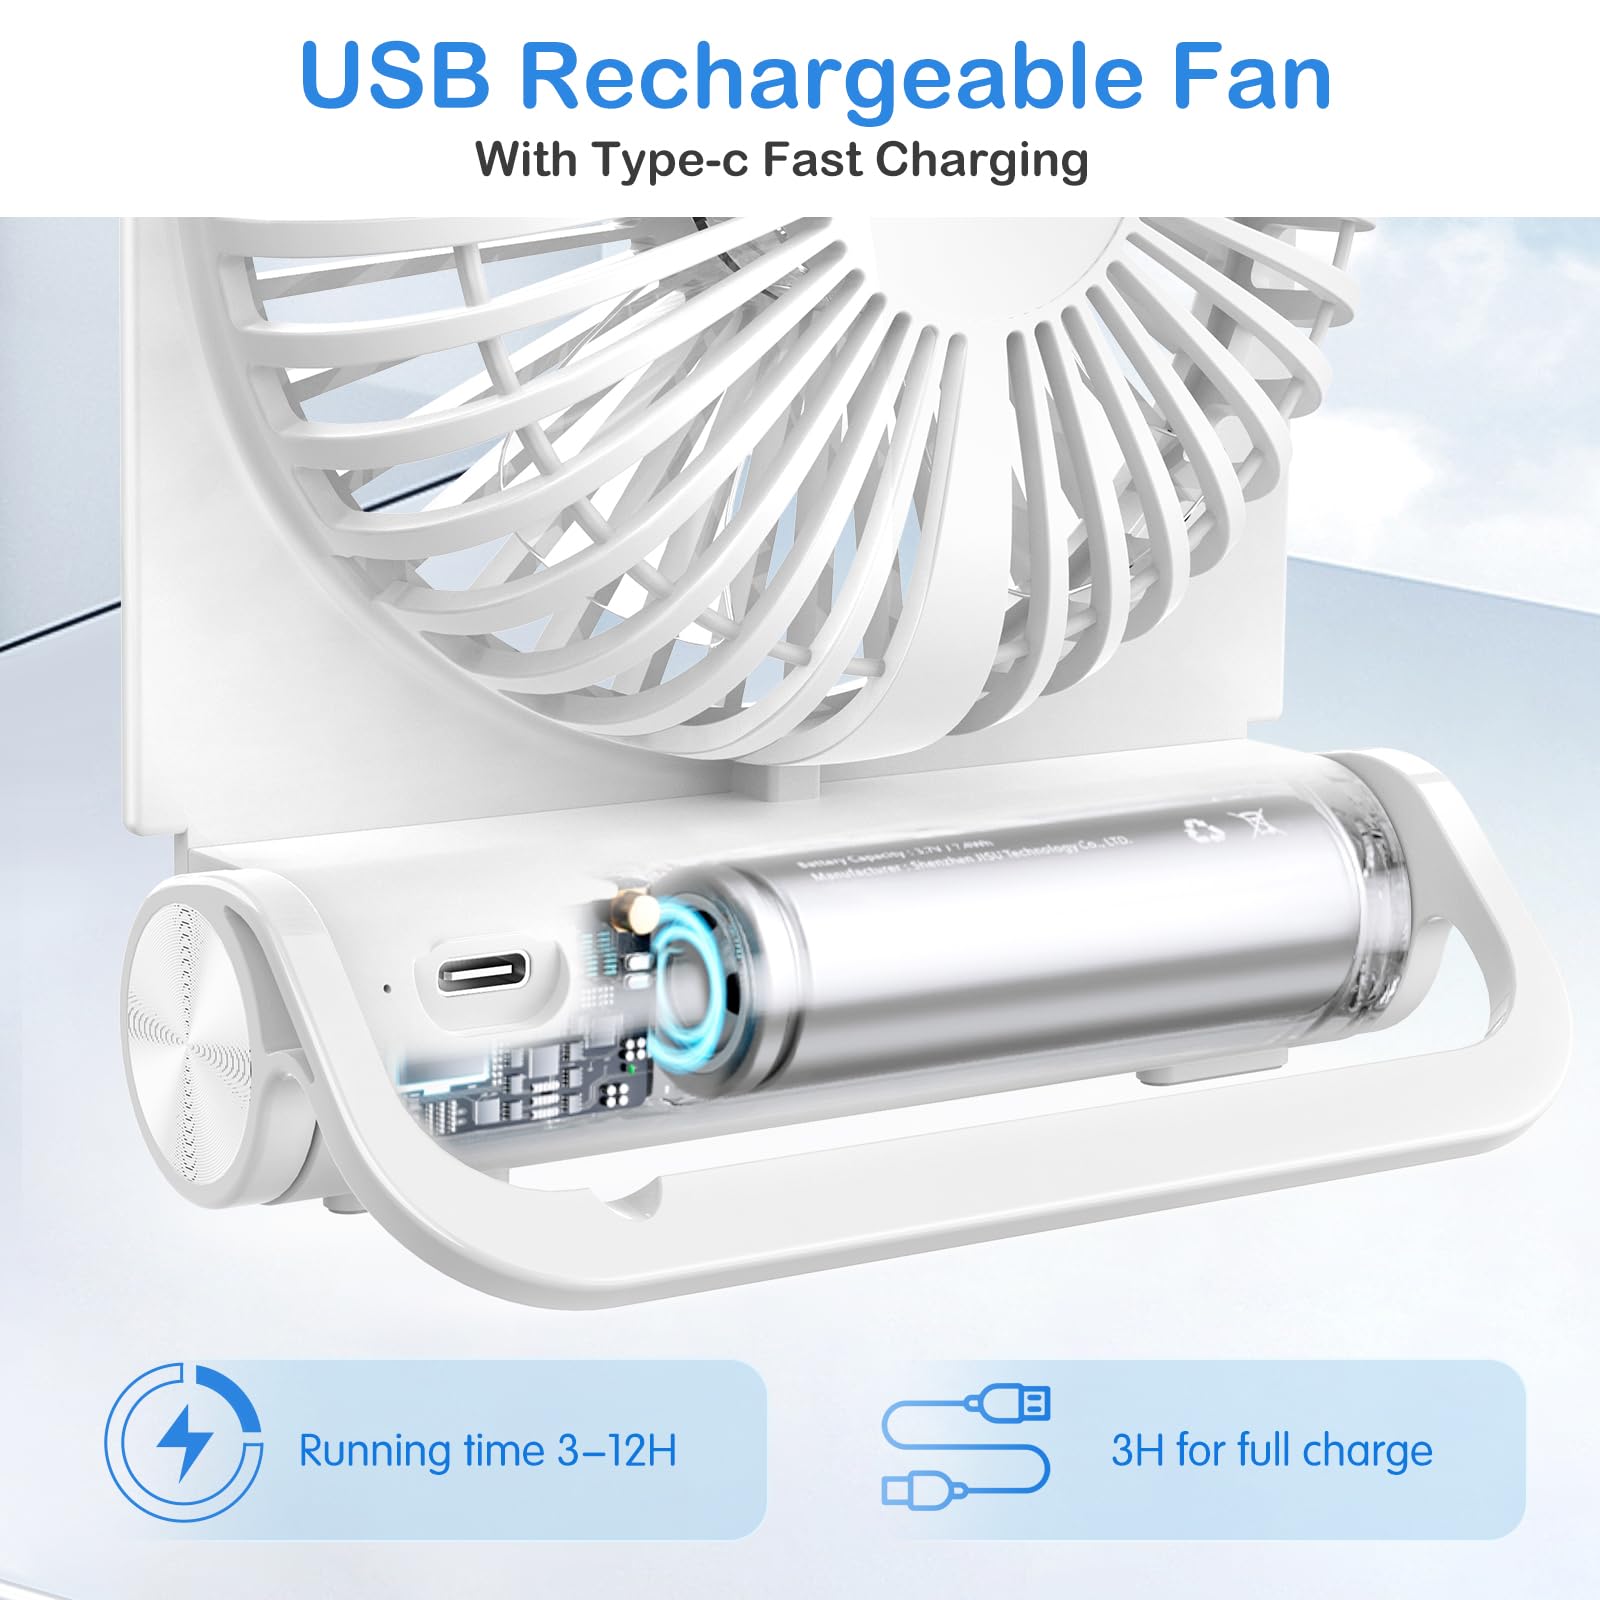 EasyAcc Small Powerful Desk Fan, 2000 Rechargeable Battery Fan - Fuly Foldable, Strong Wind, 4 Speeds - USB C Fan for Home, Travel, Cruise, Sporting Events, Hot Flashes - Ideal Gift for Men Women